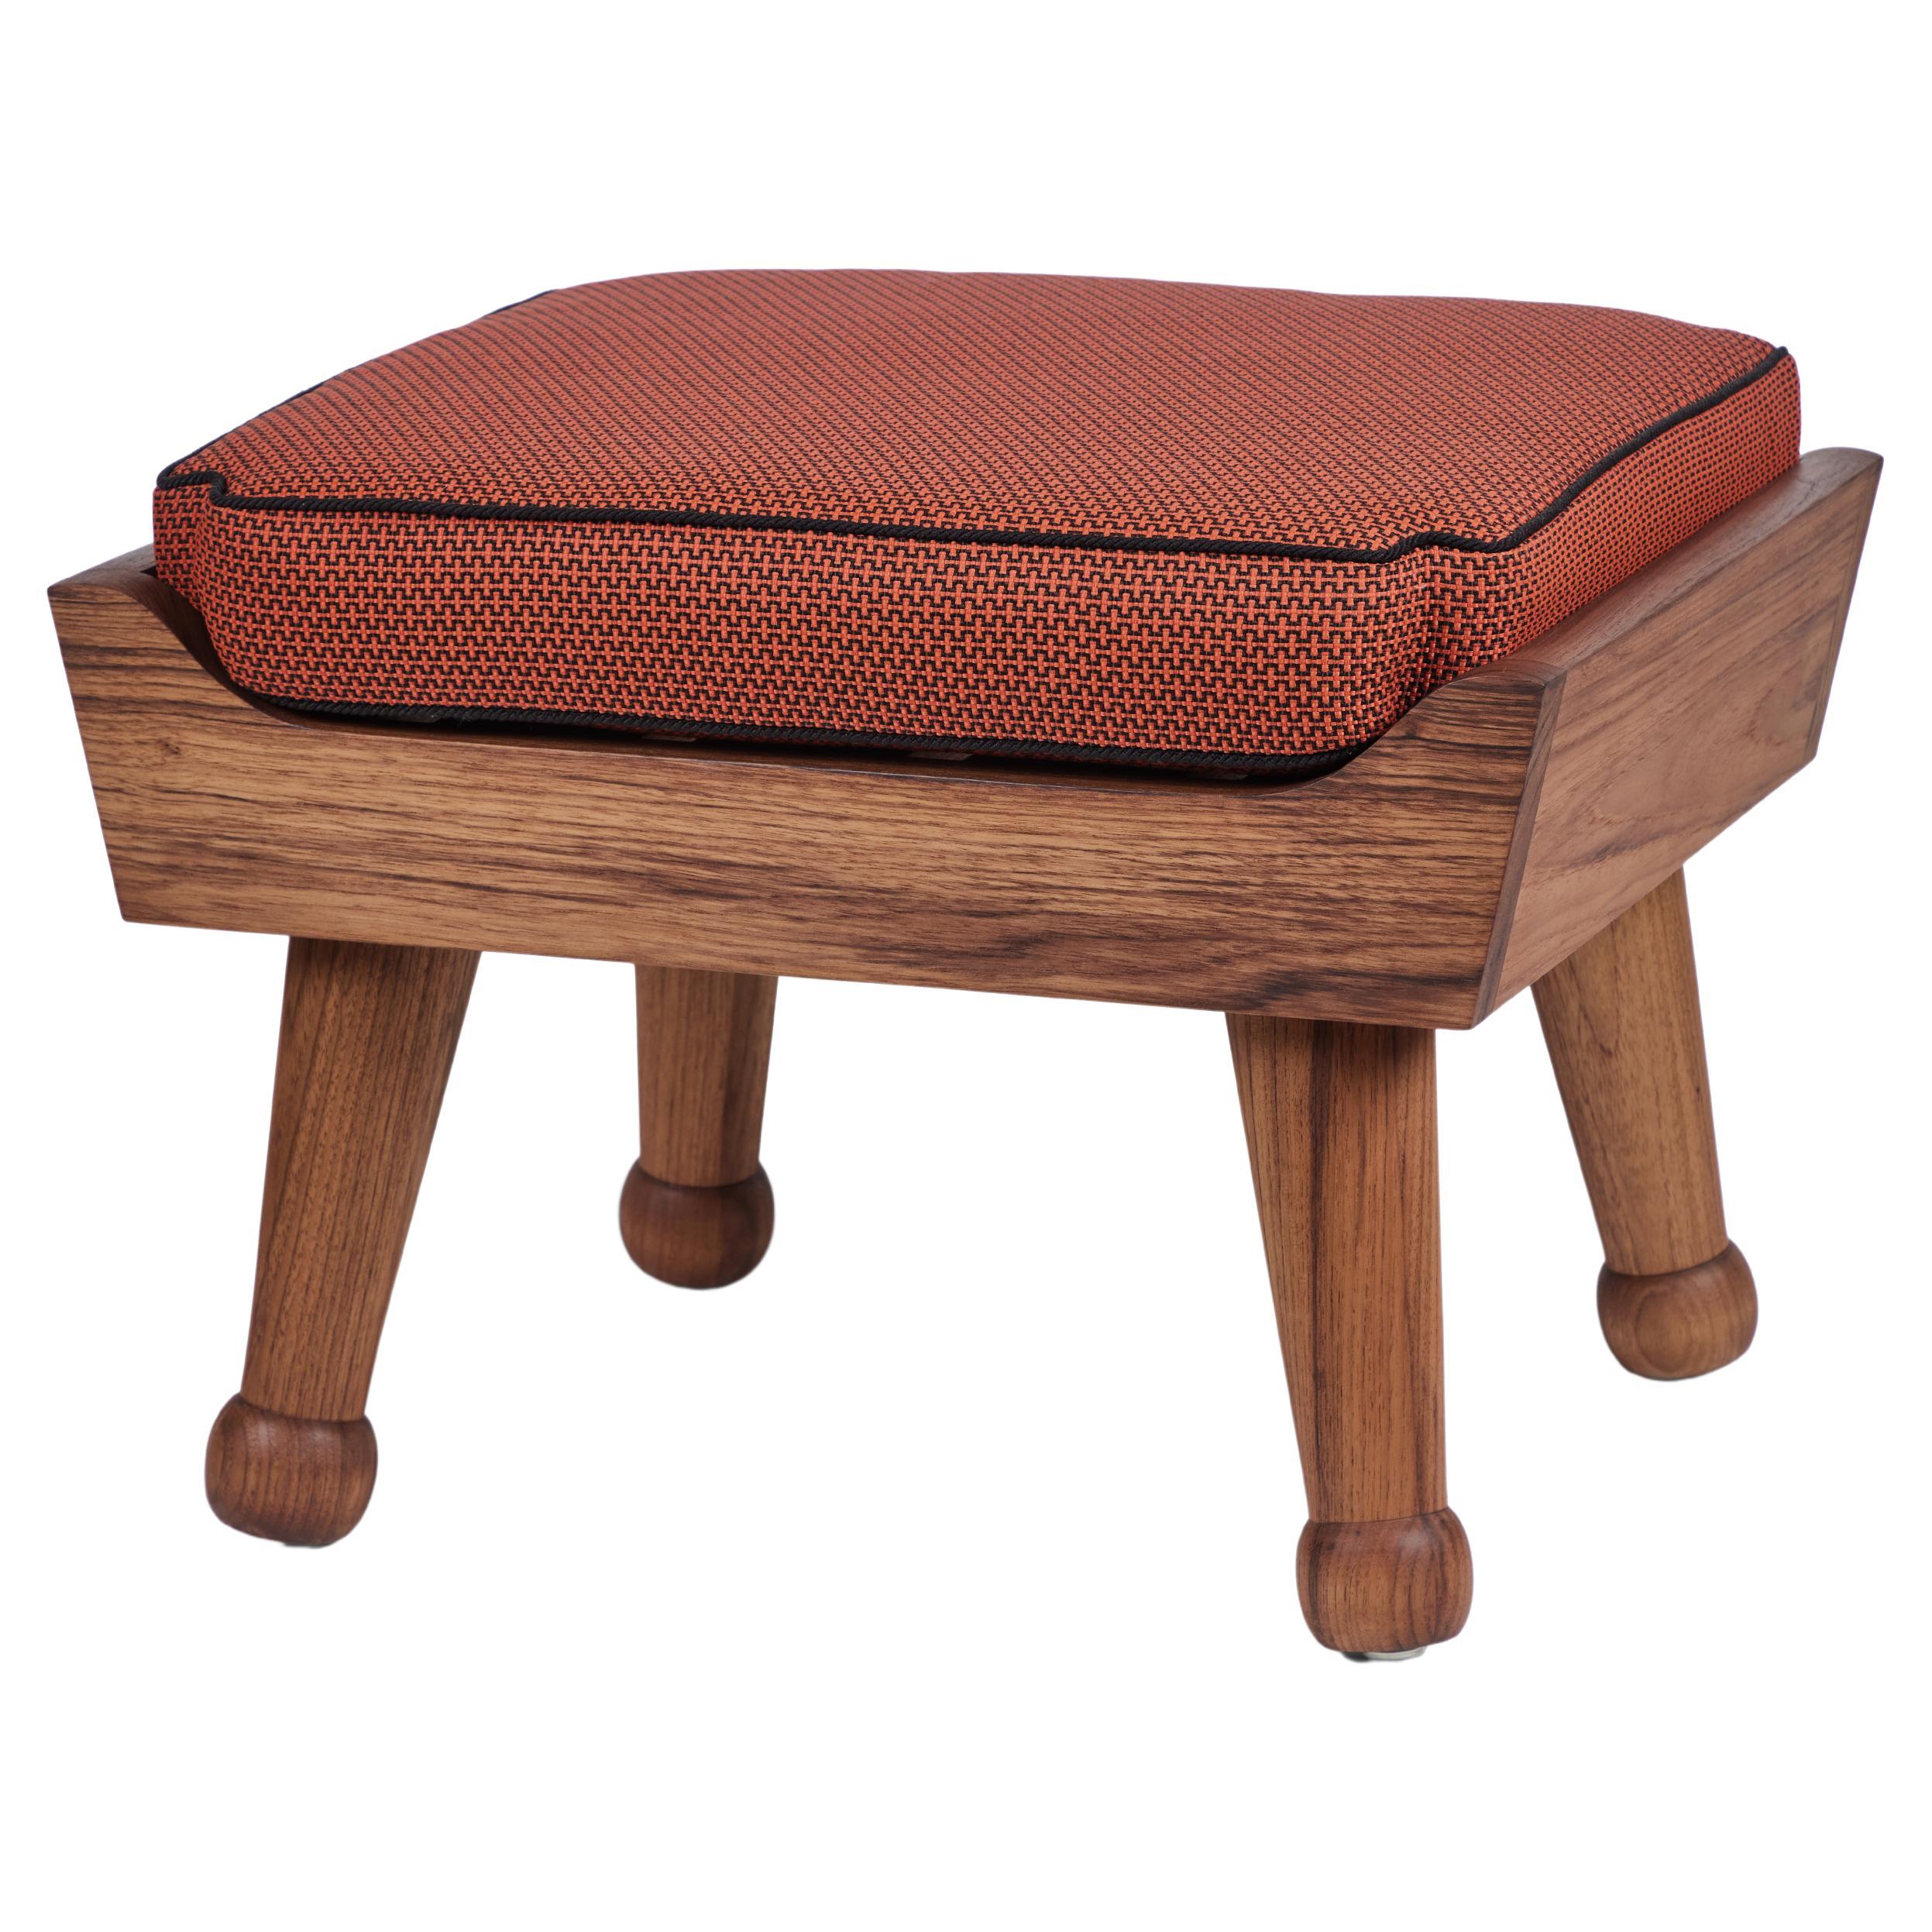 Hayworth Indoor/Outdoor Ottoman, in Teak with Cushion, by August Abode